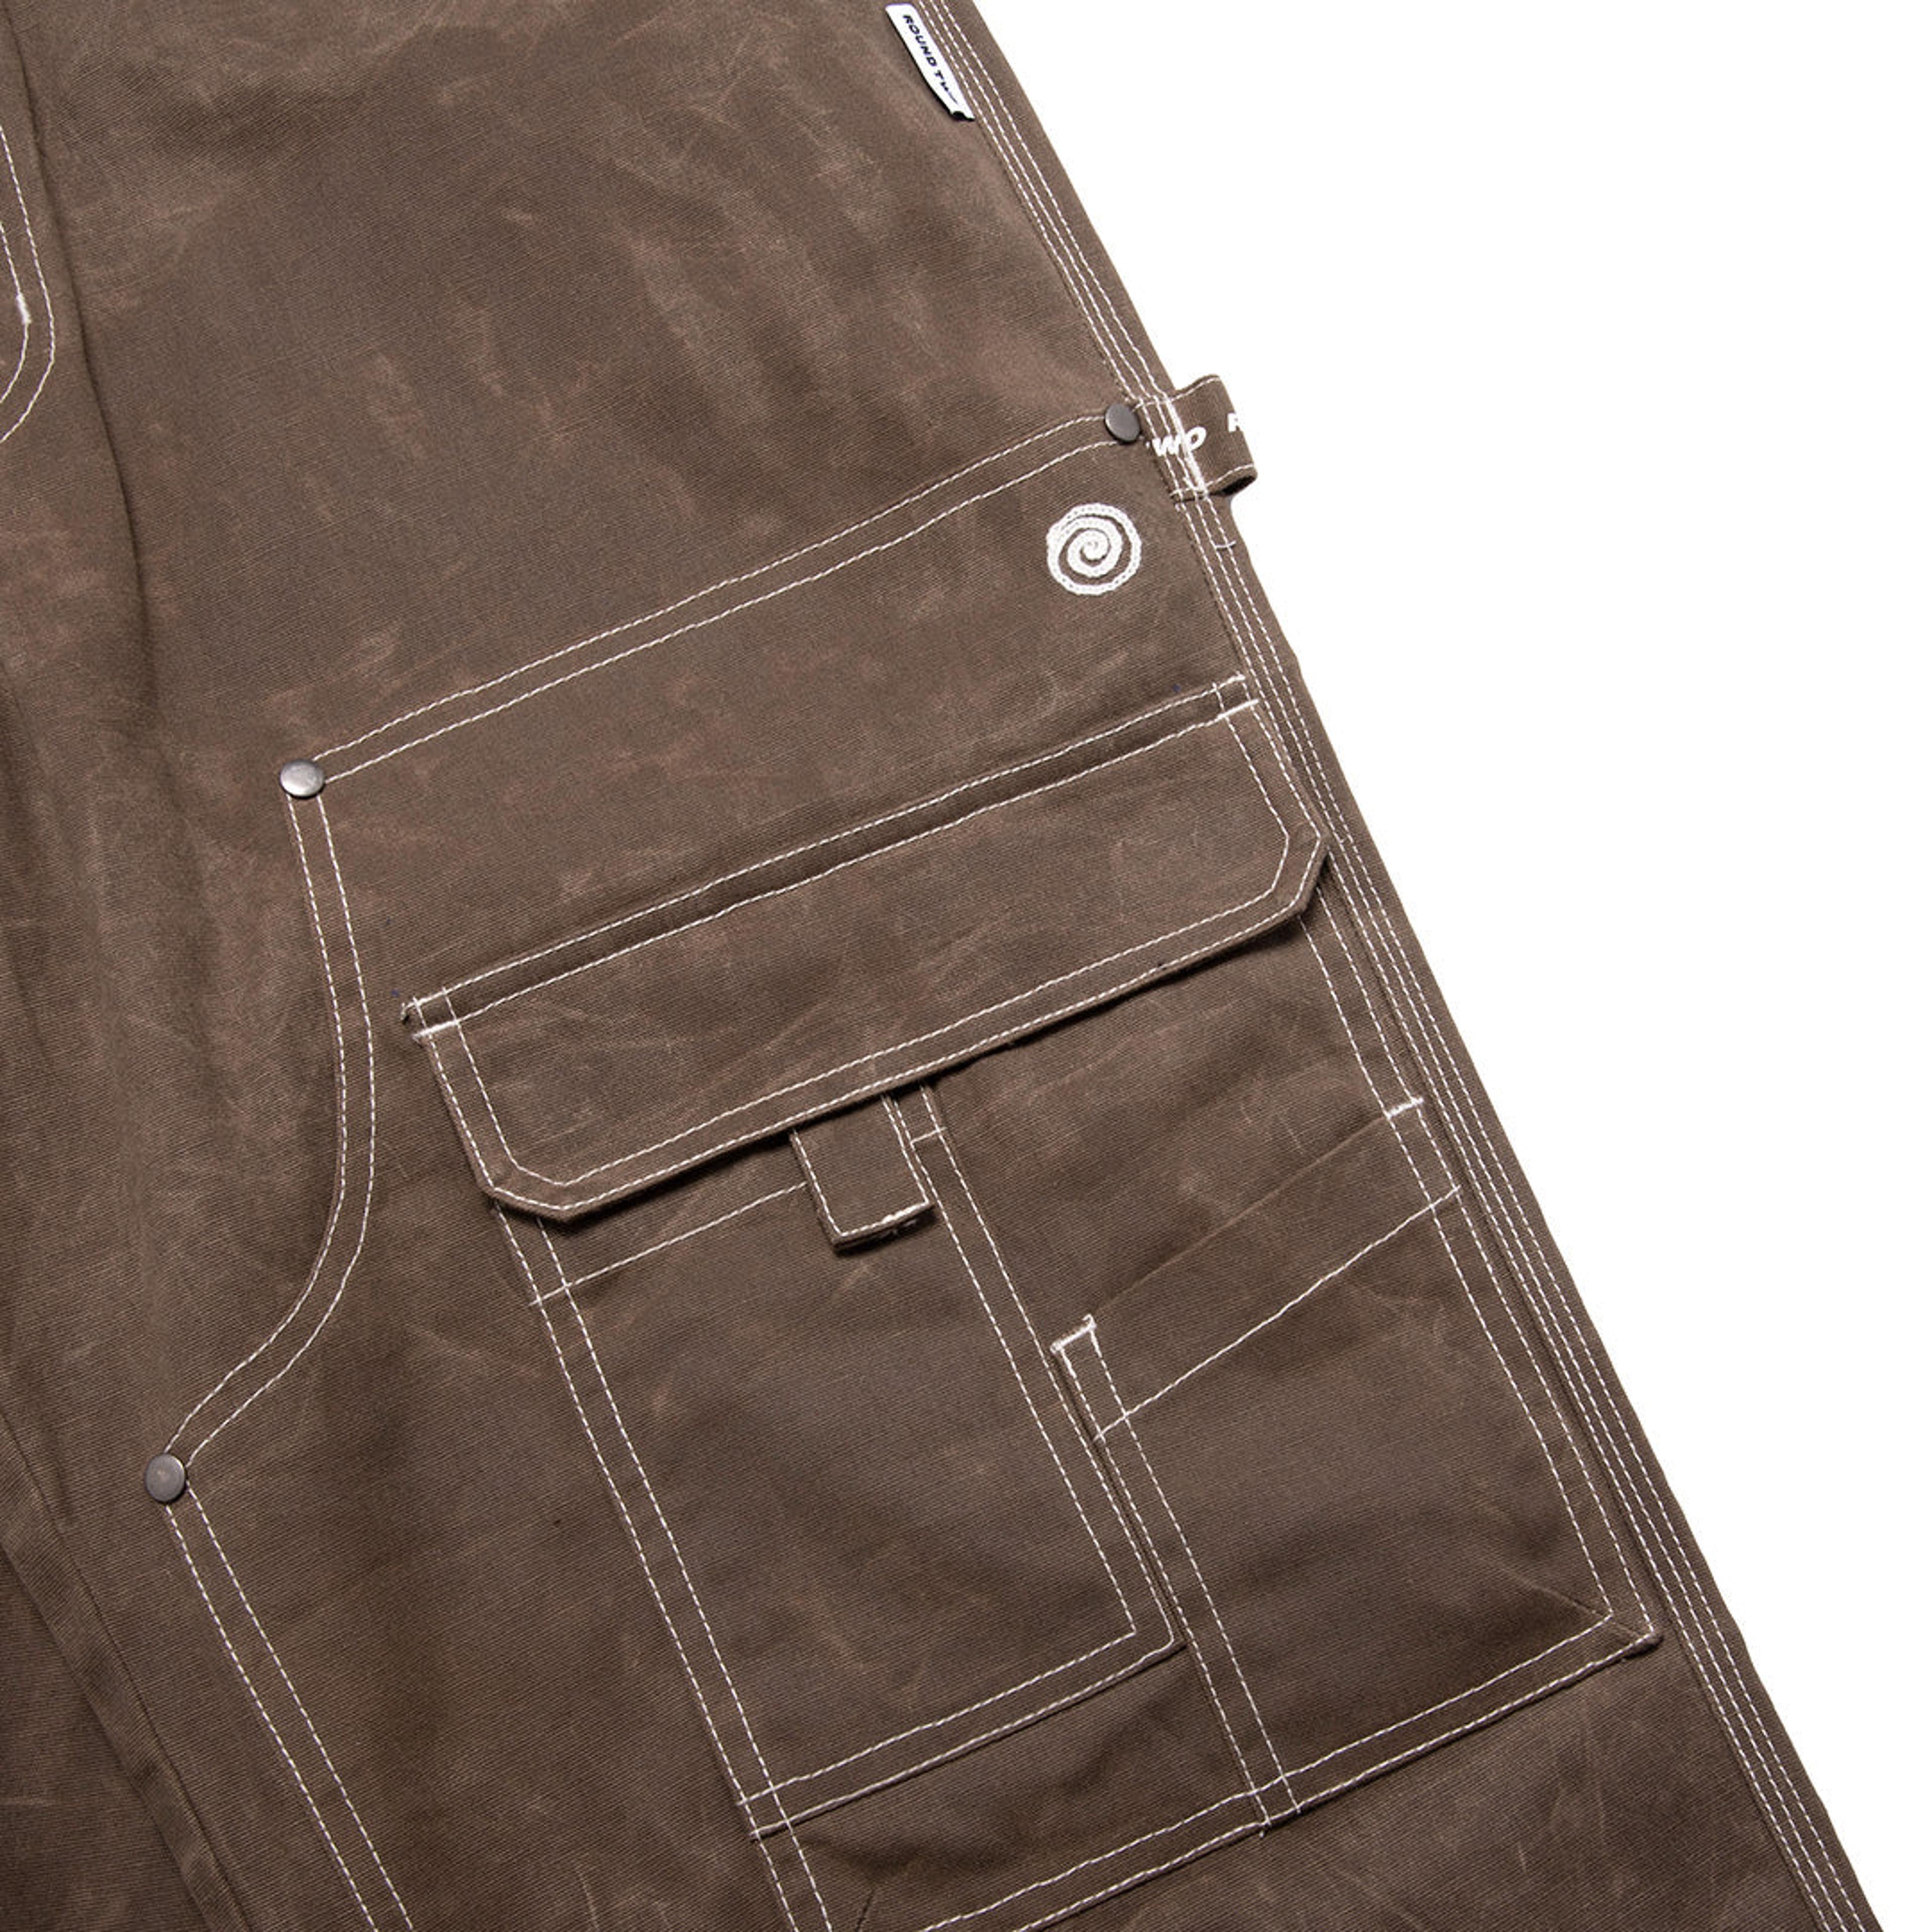 Alternate View 2 of Waxed Canvas Cargo Work Pant - Brown